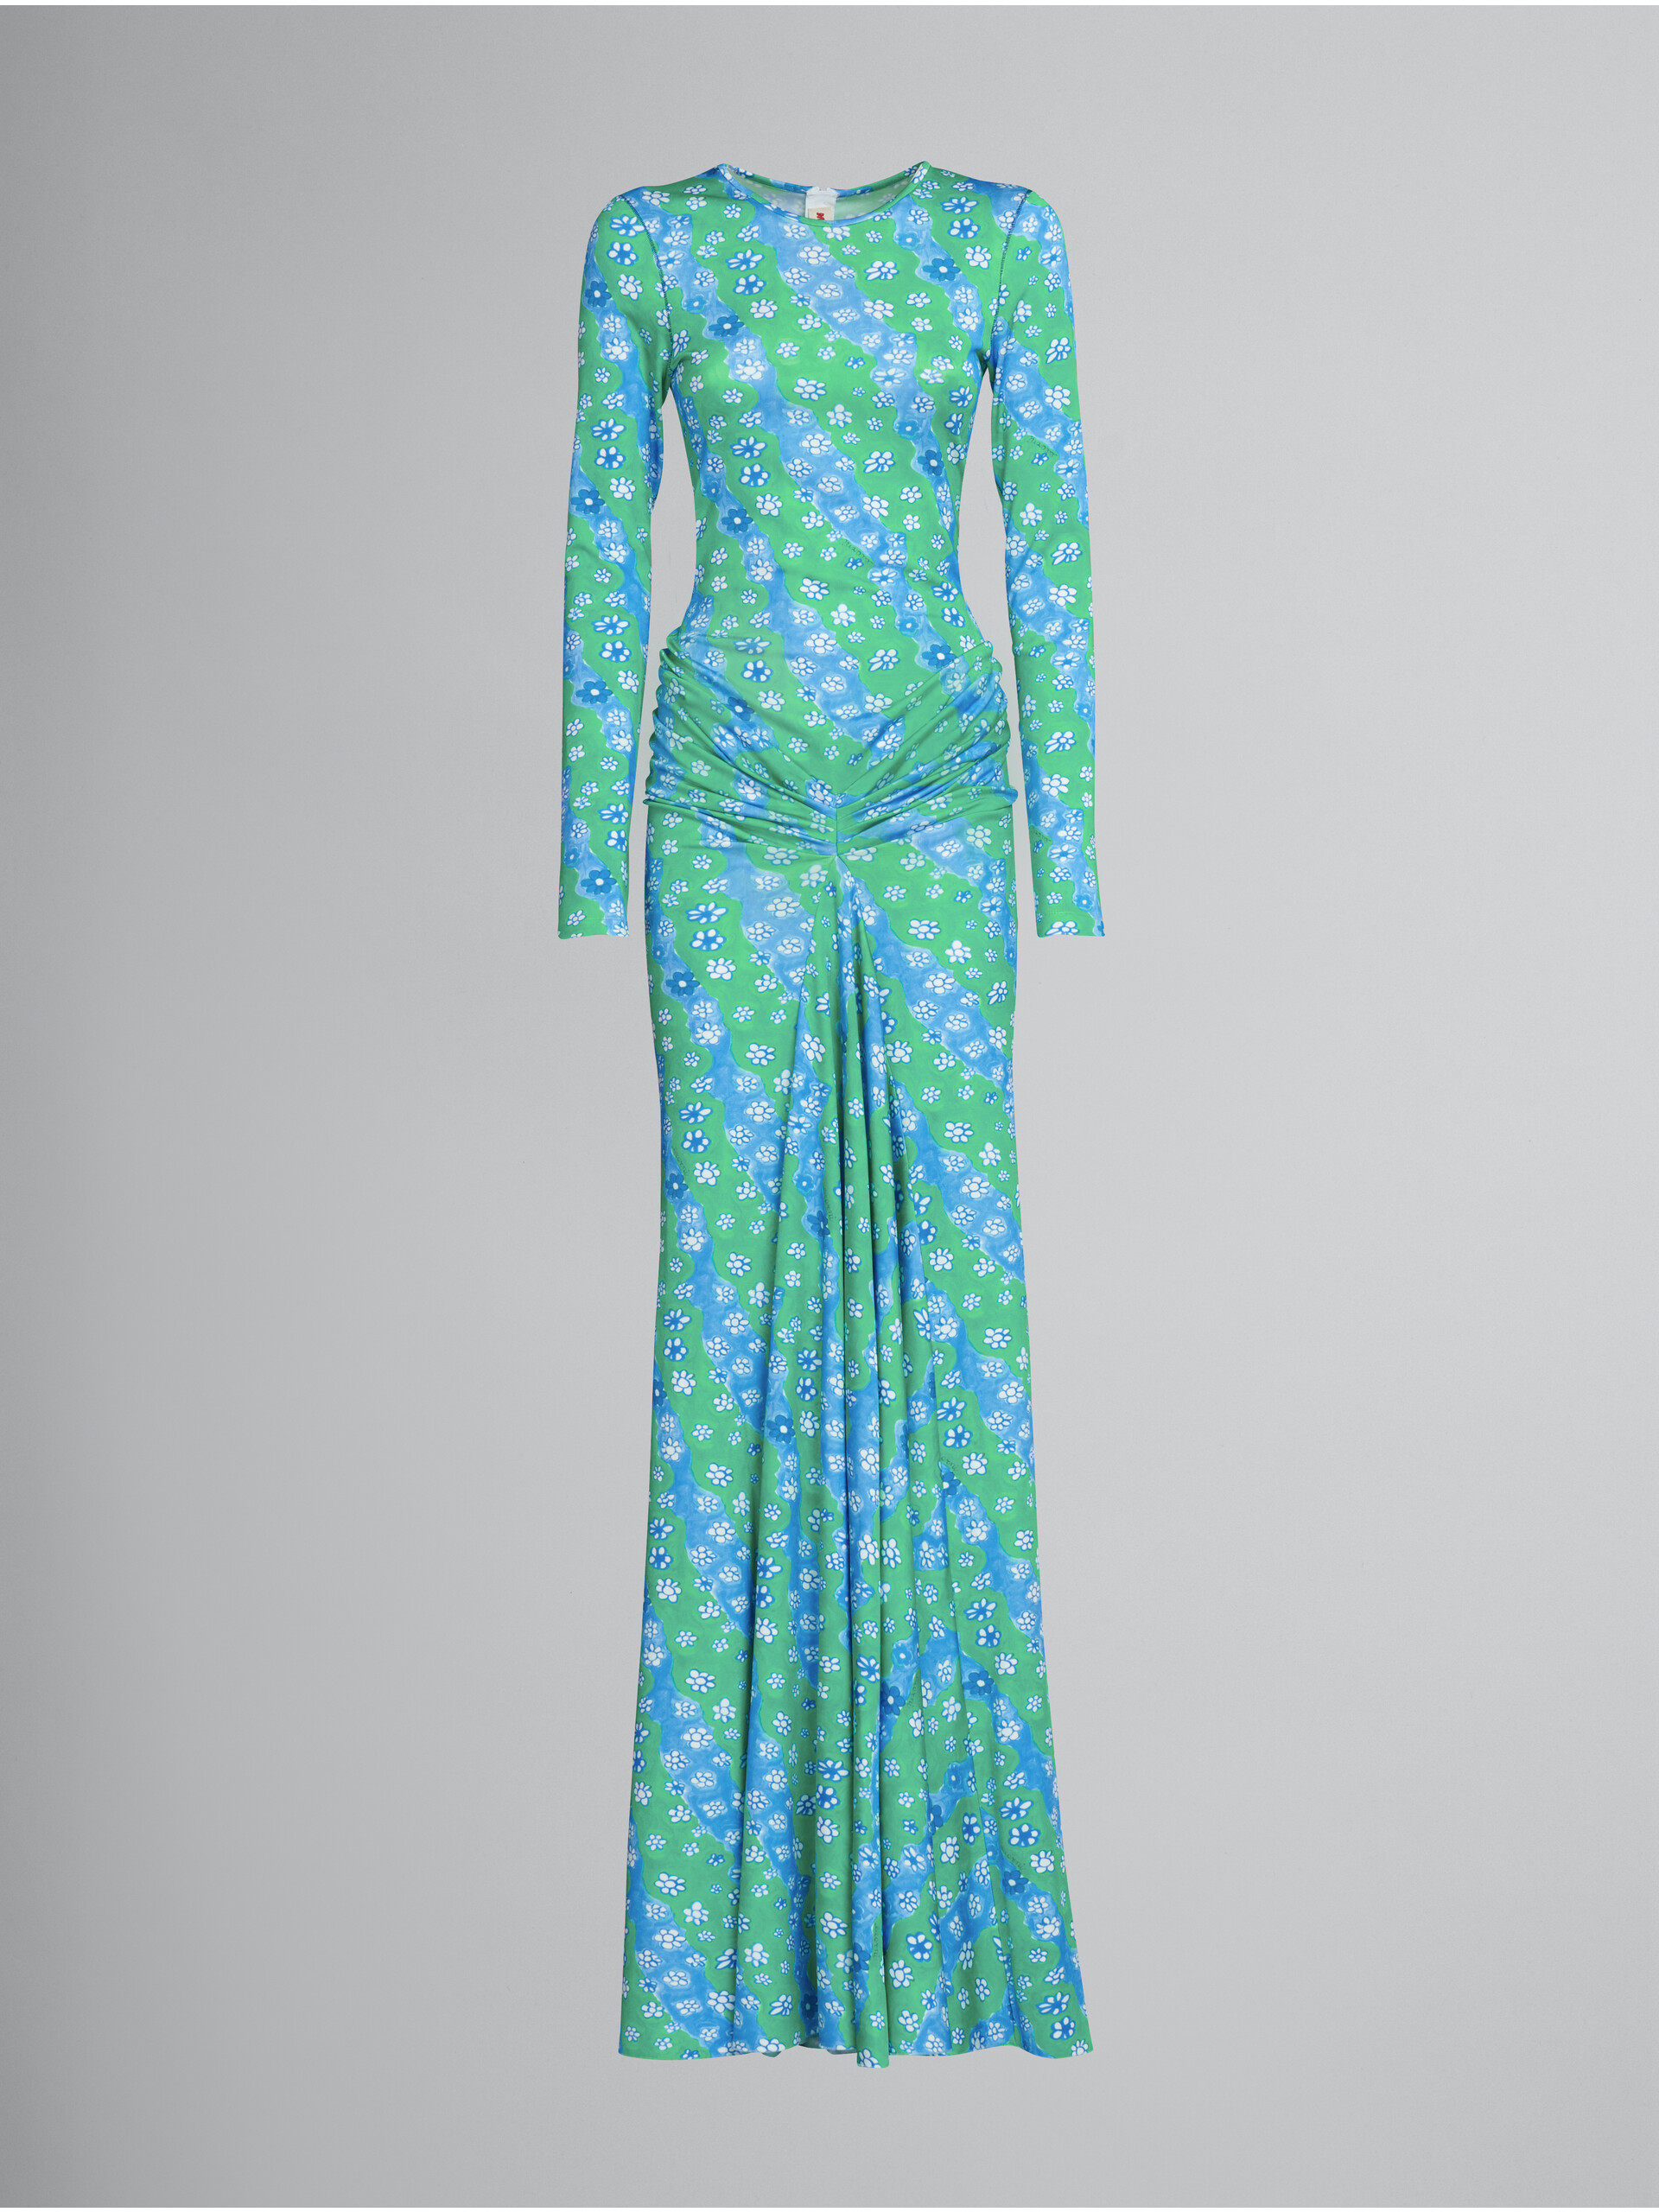 Long dress in fluid printed jersey - Dresses - Image 1